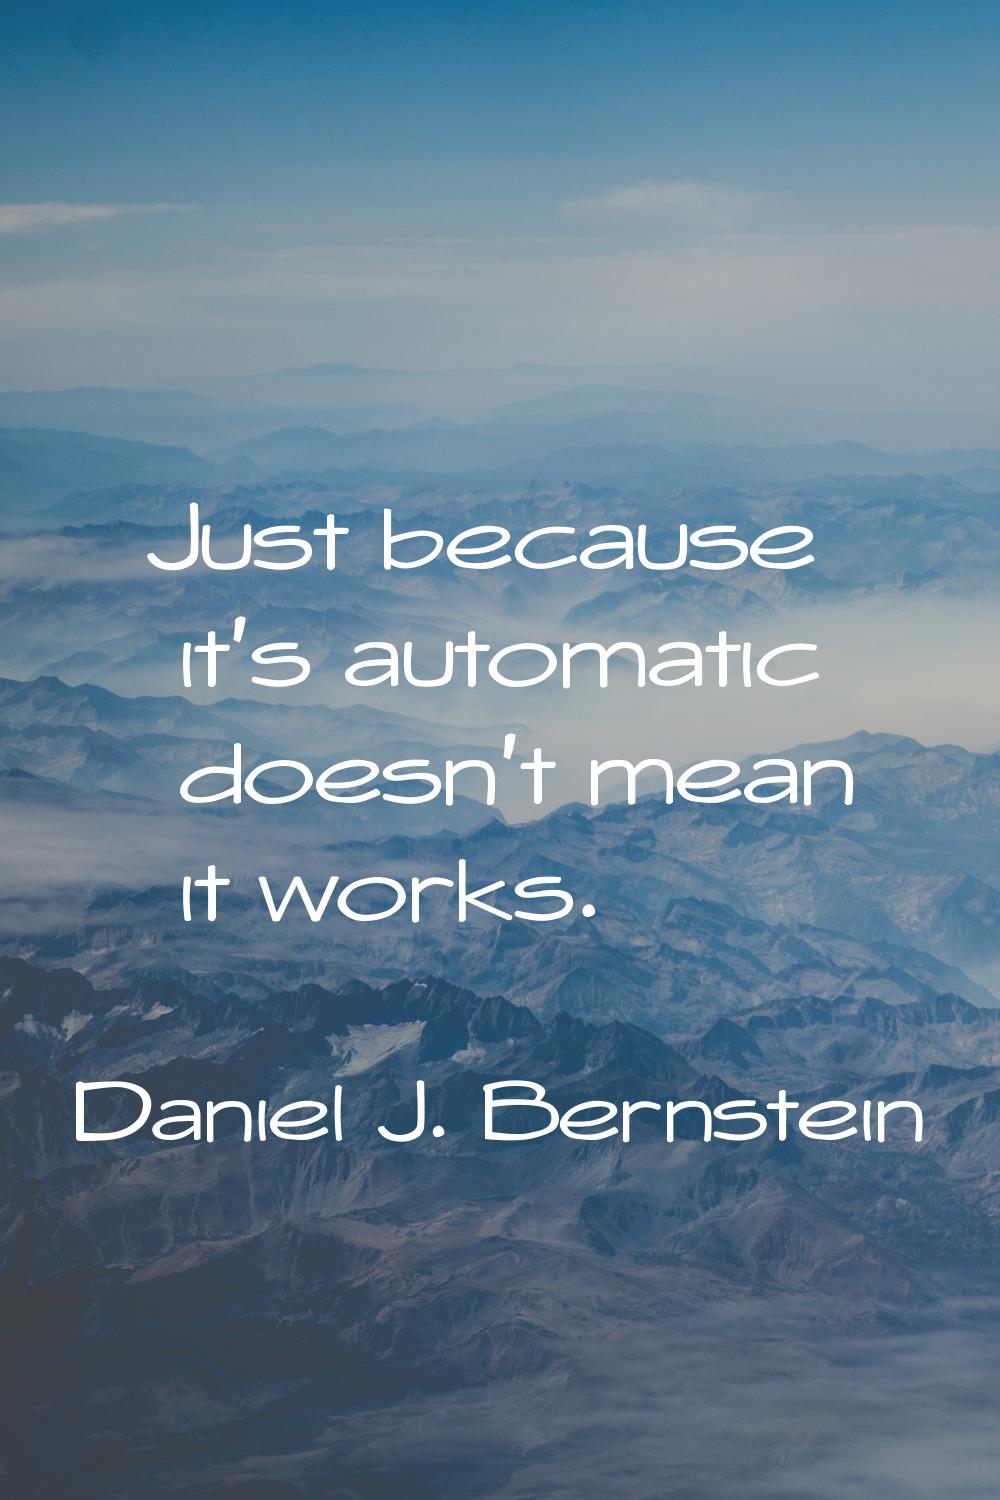 Just because it's automatic doesn't mean it works.